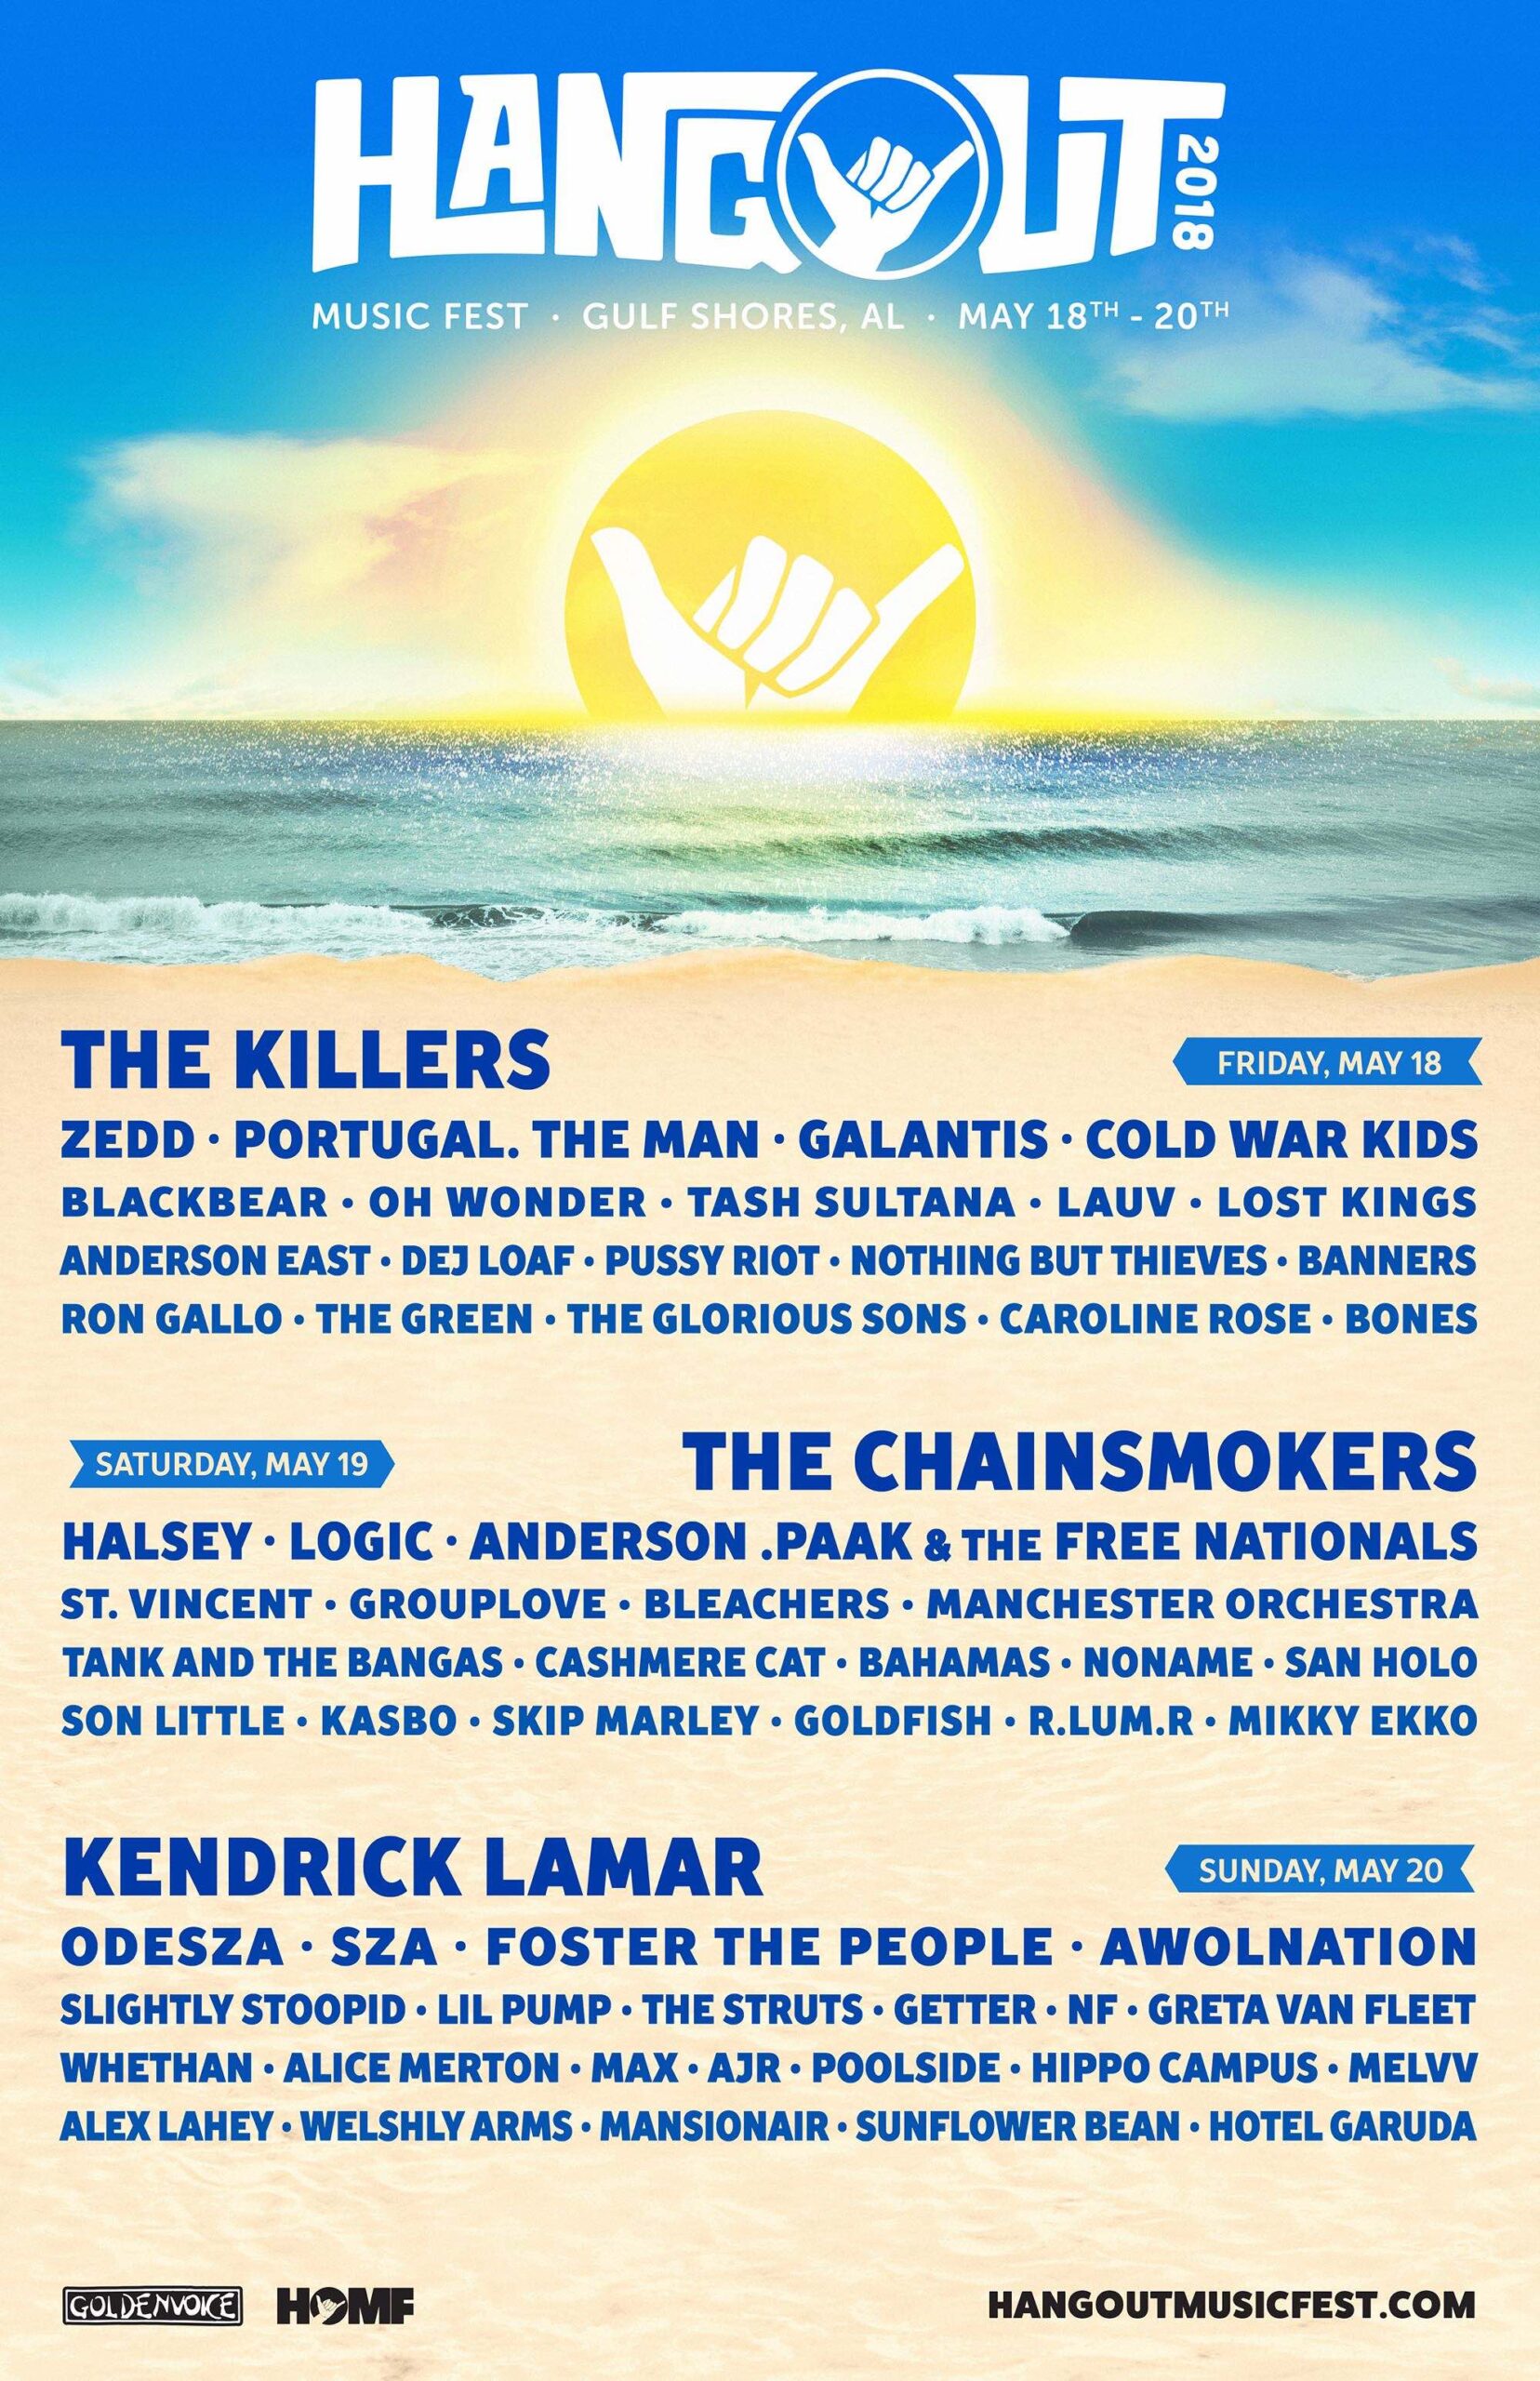 Hangout Music Festival 2018 lineup. Photo provided.